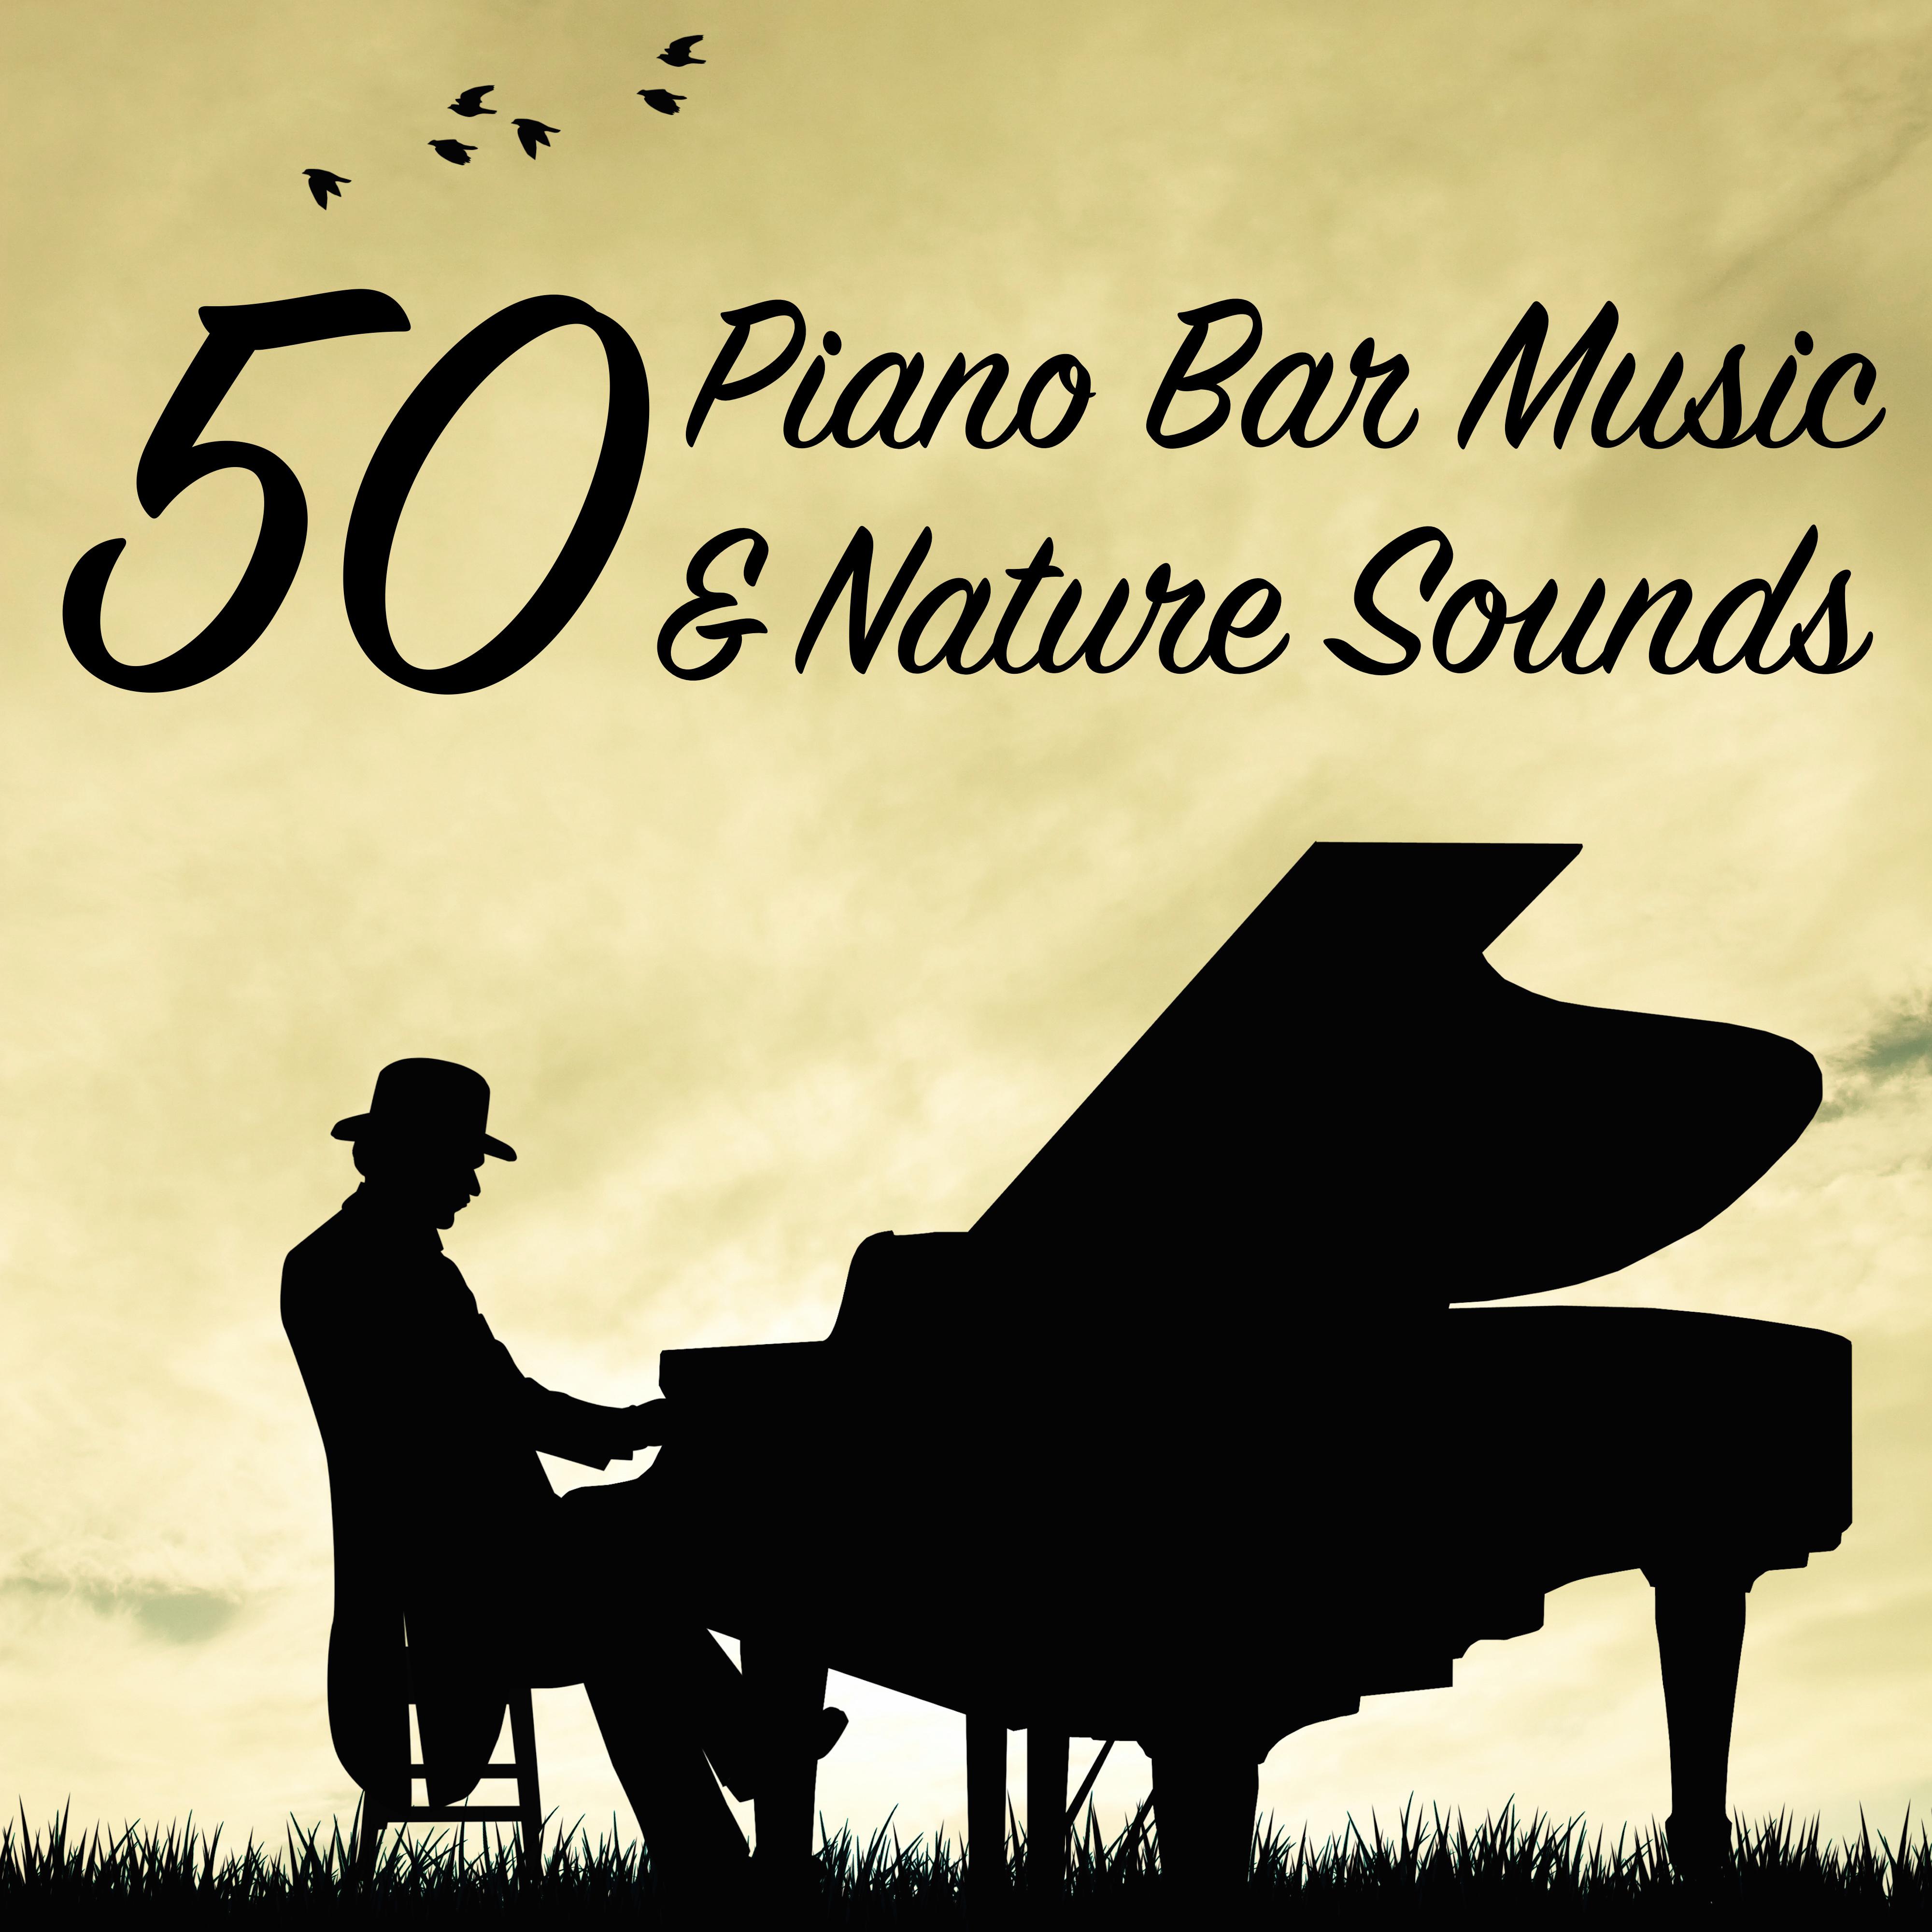 50 Piano Bar Music & Nature Sounds - Background Easy Listening Pianobar Music & Relaxing Piano Music (Slow Jazz Collection)